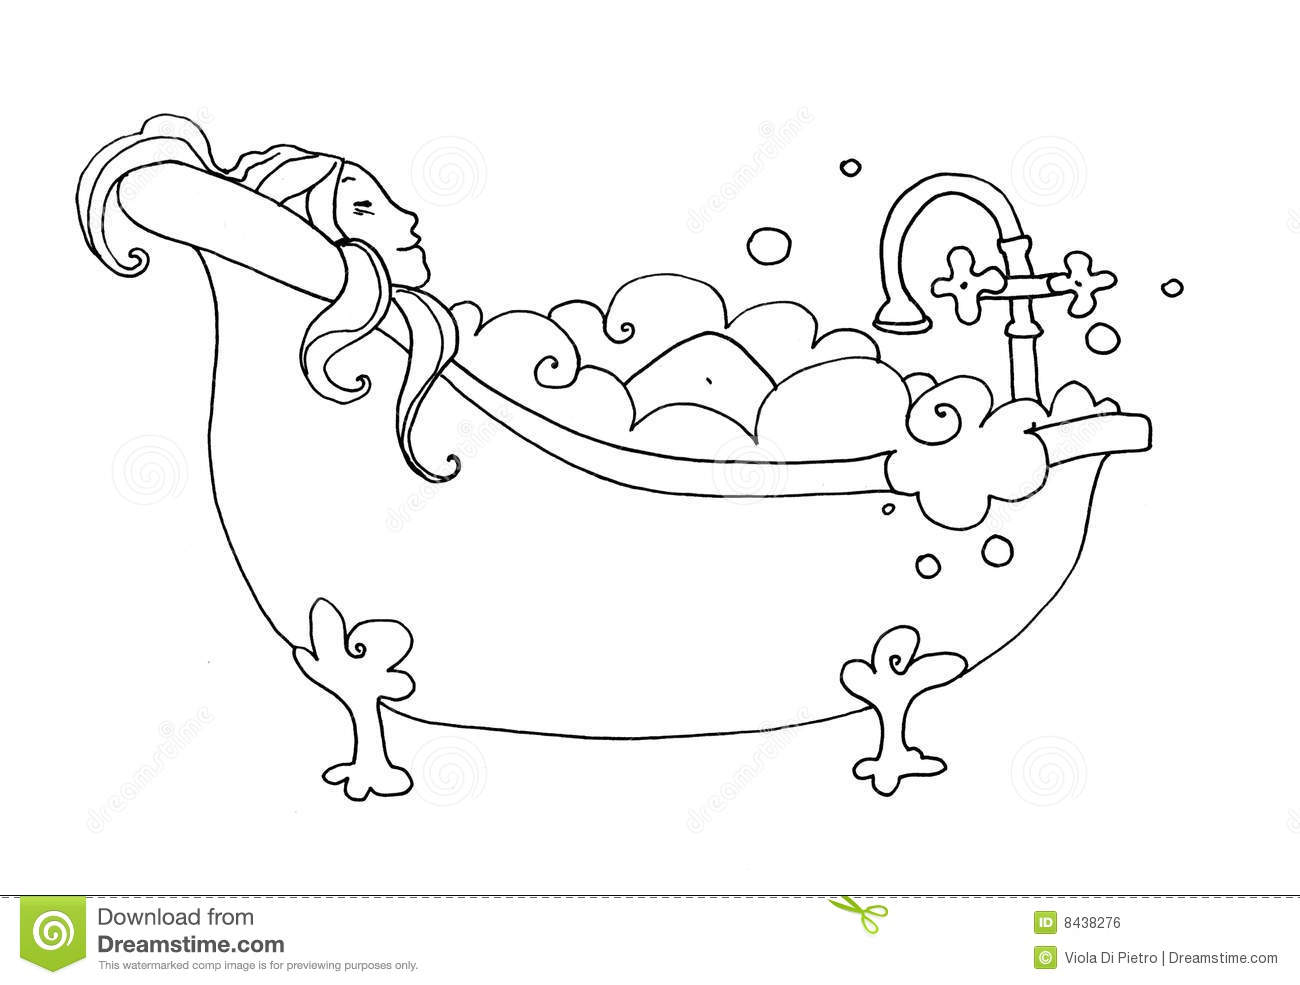 Free ideas images thevote. Bathtub clipart coloring page